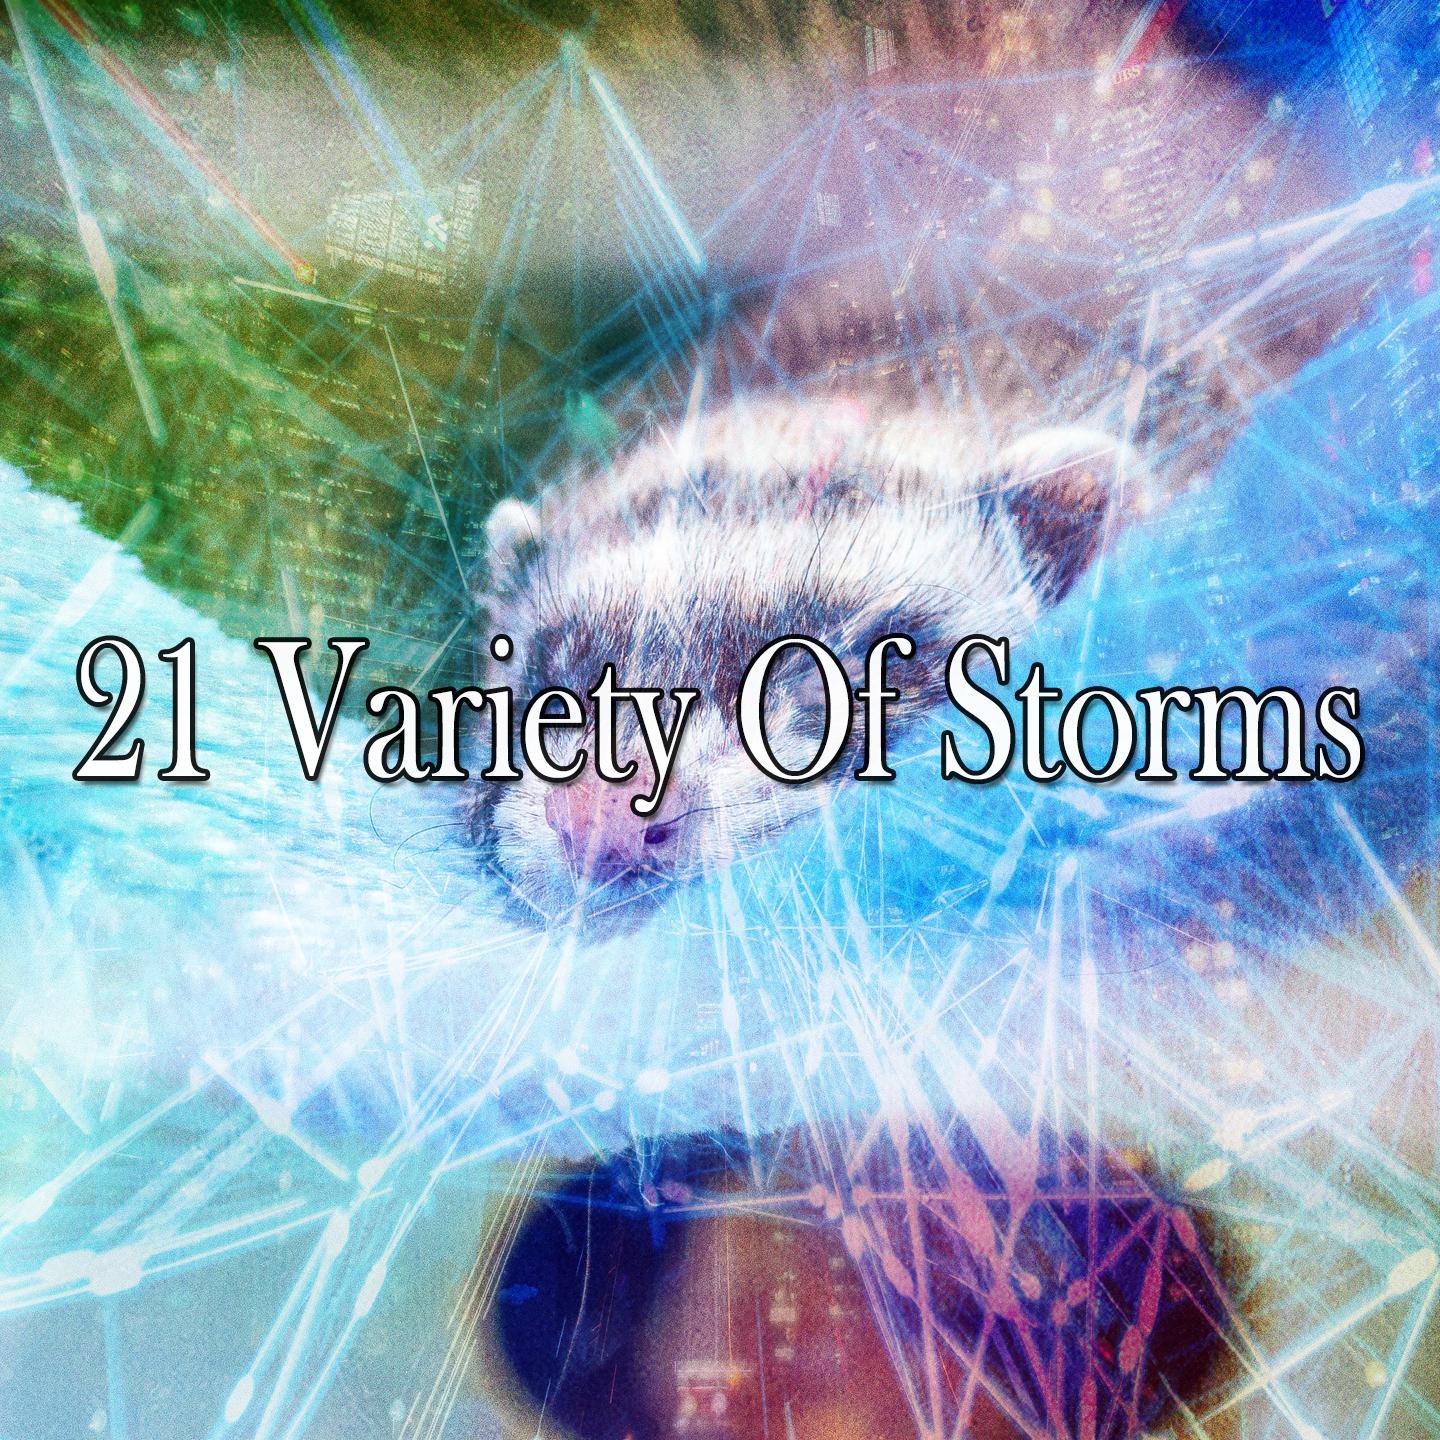 21 Variety of Storms